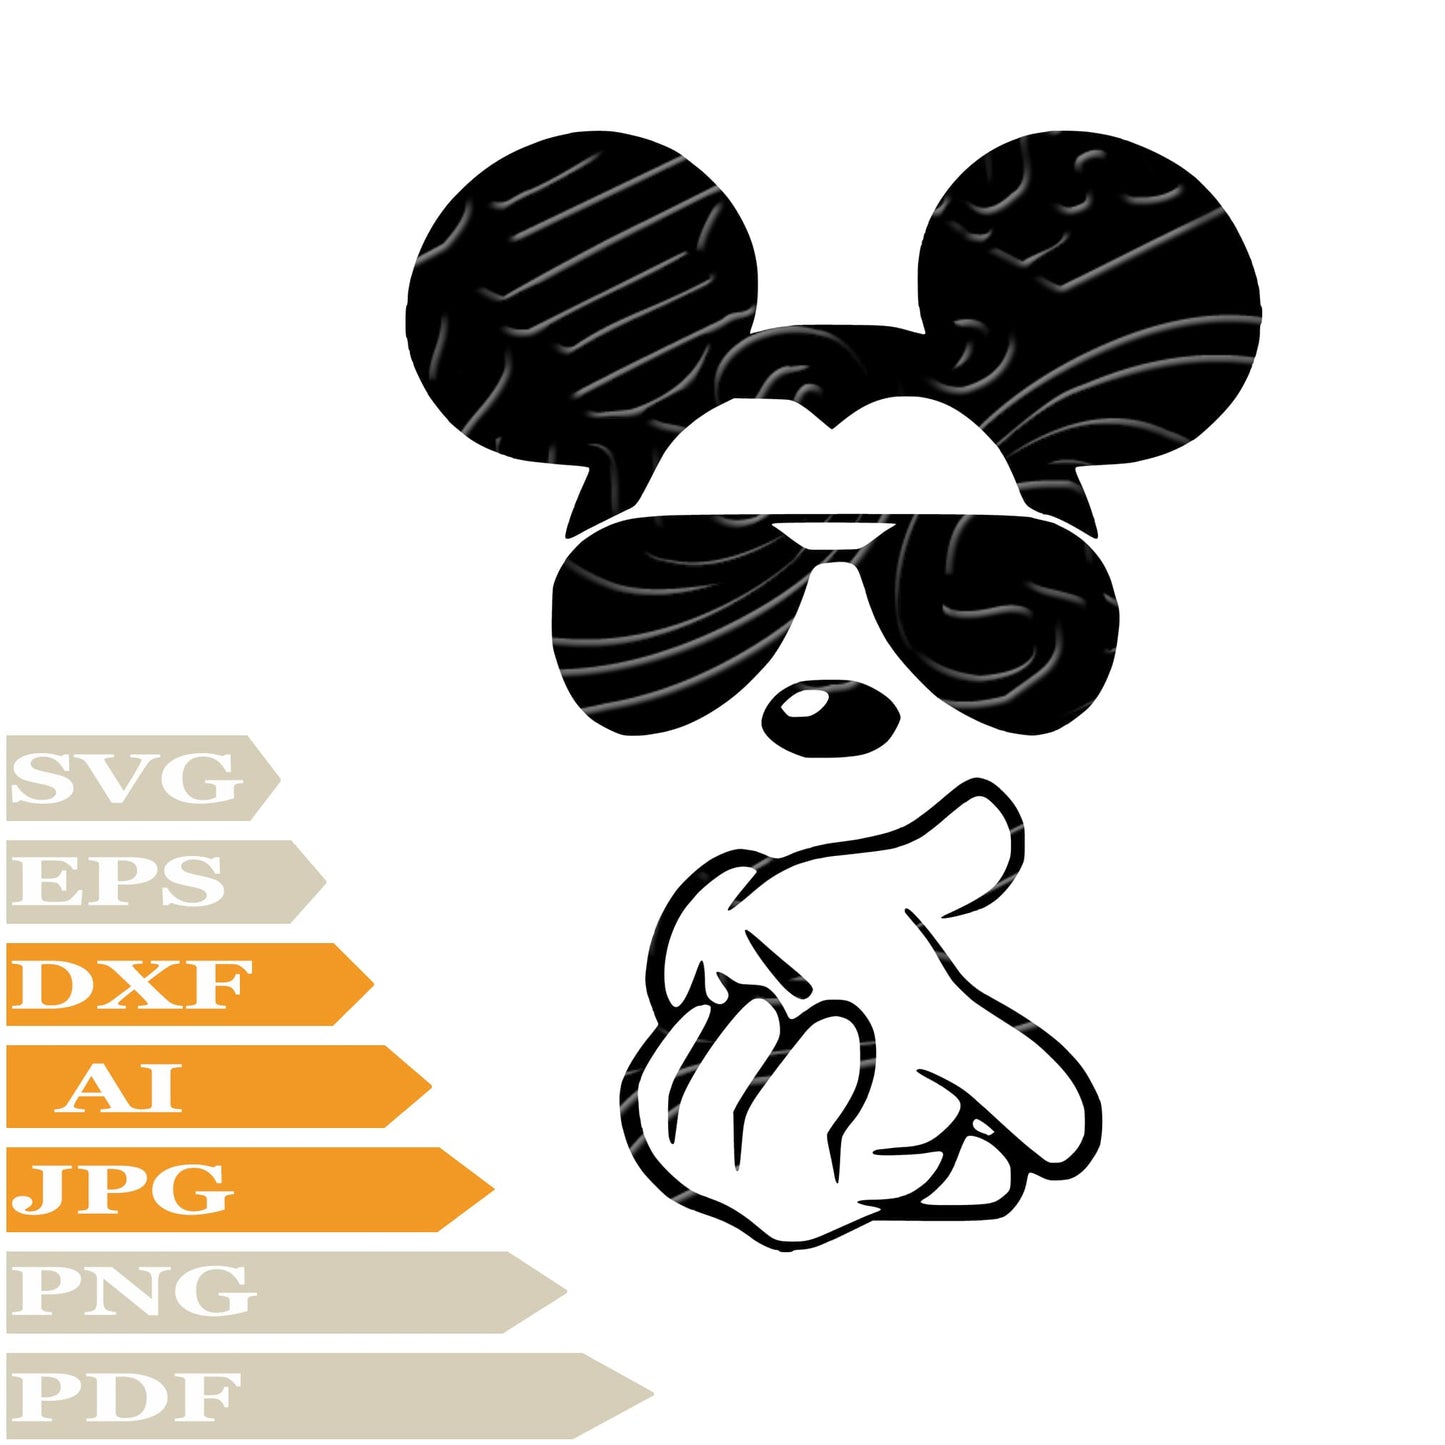 Mickey Mause, Minnie Mause Svg File, Image Cut, Png, For Tattoo, Silhouette, Digital Vector Download, Cut File, Clipart, For Cricut